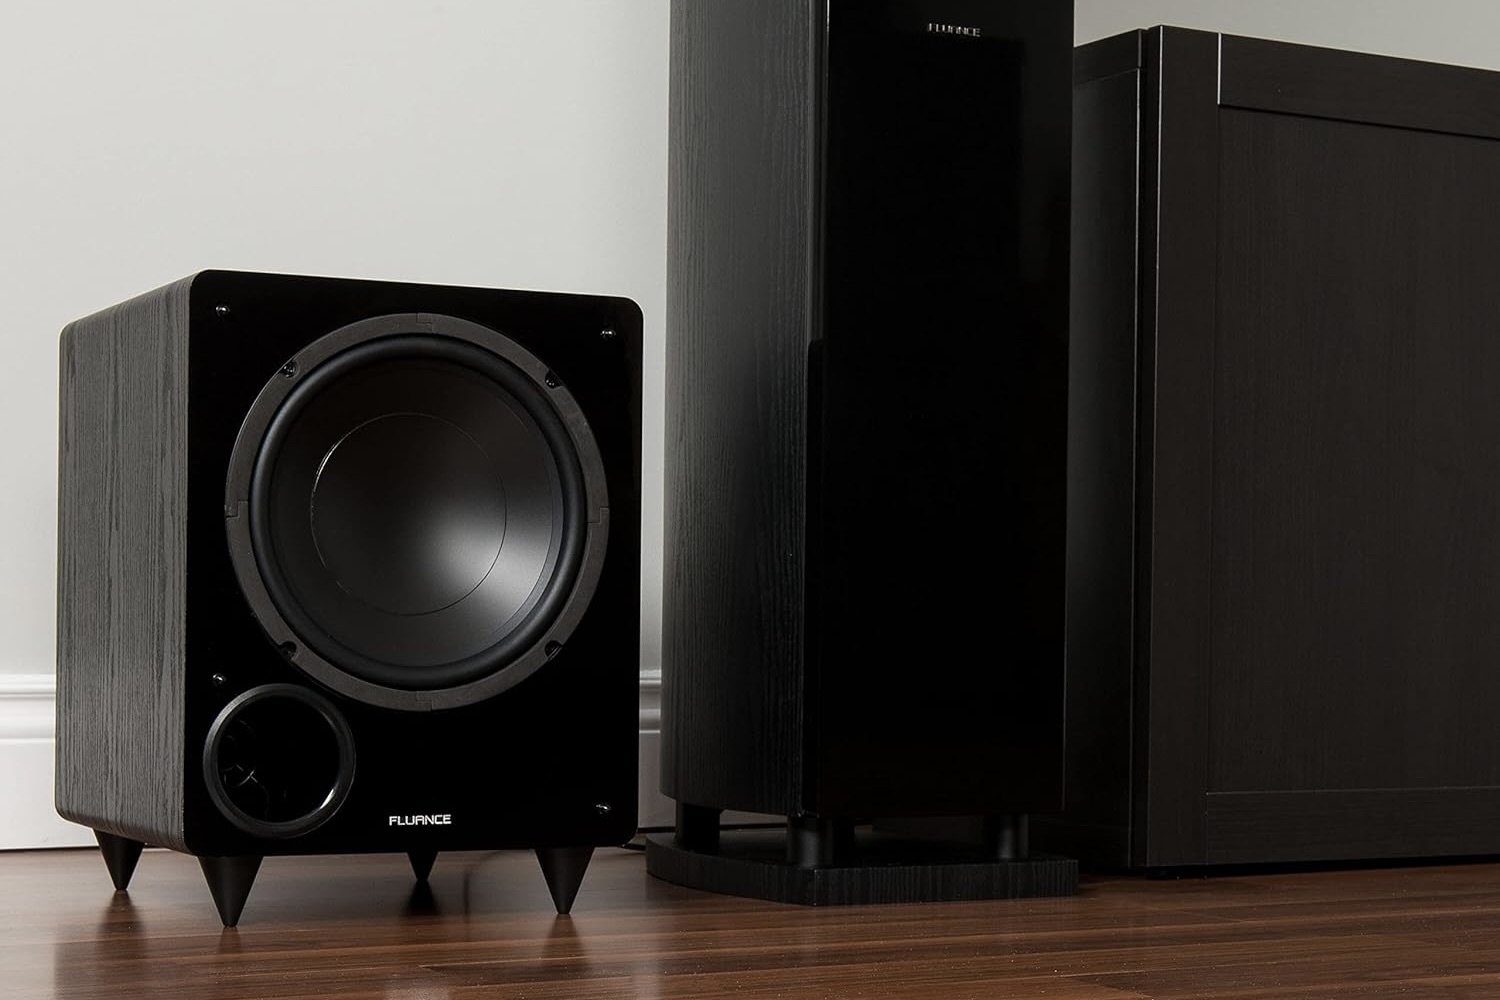 Subwoofer: Powered Subwoofers - Best Buy